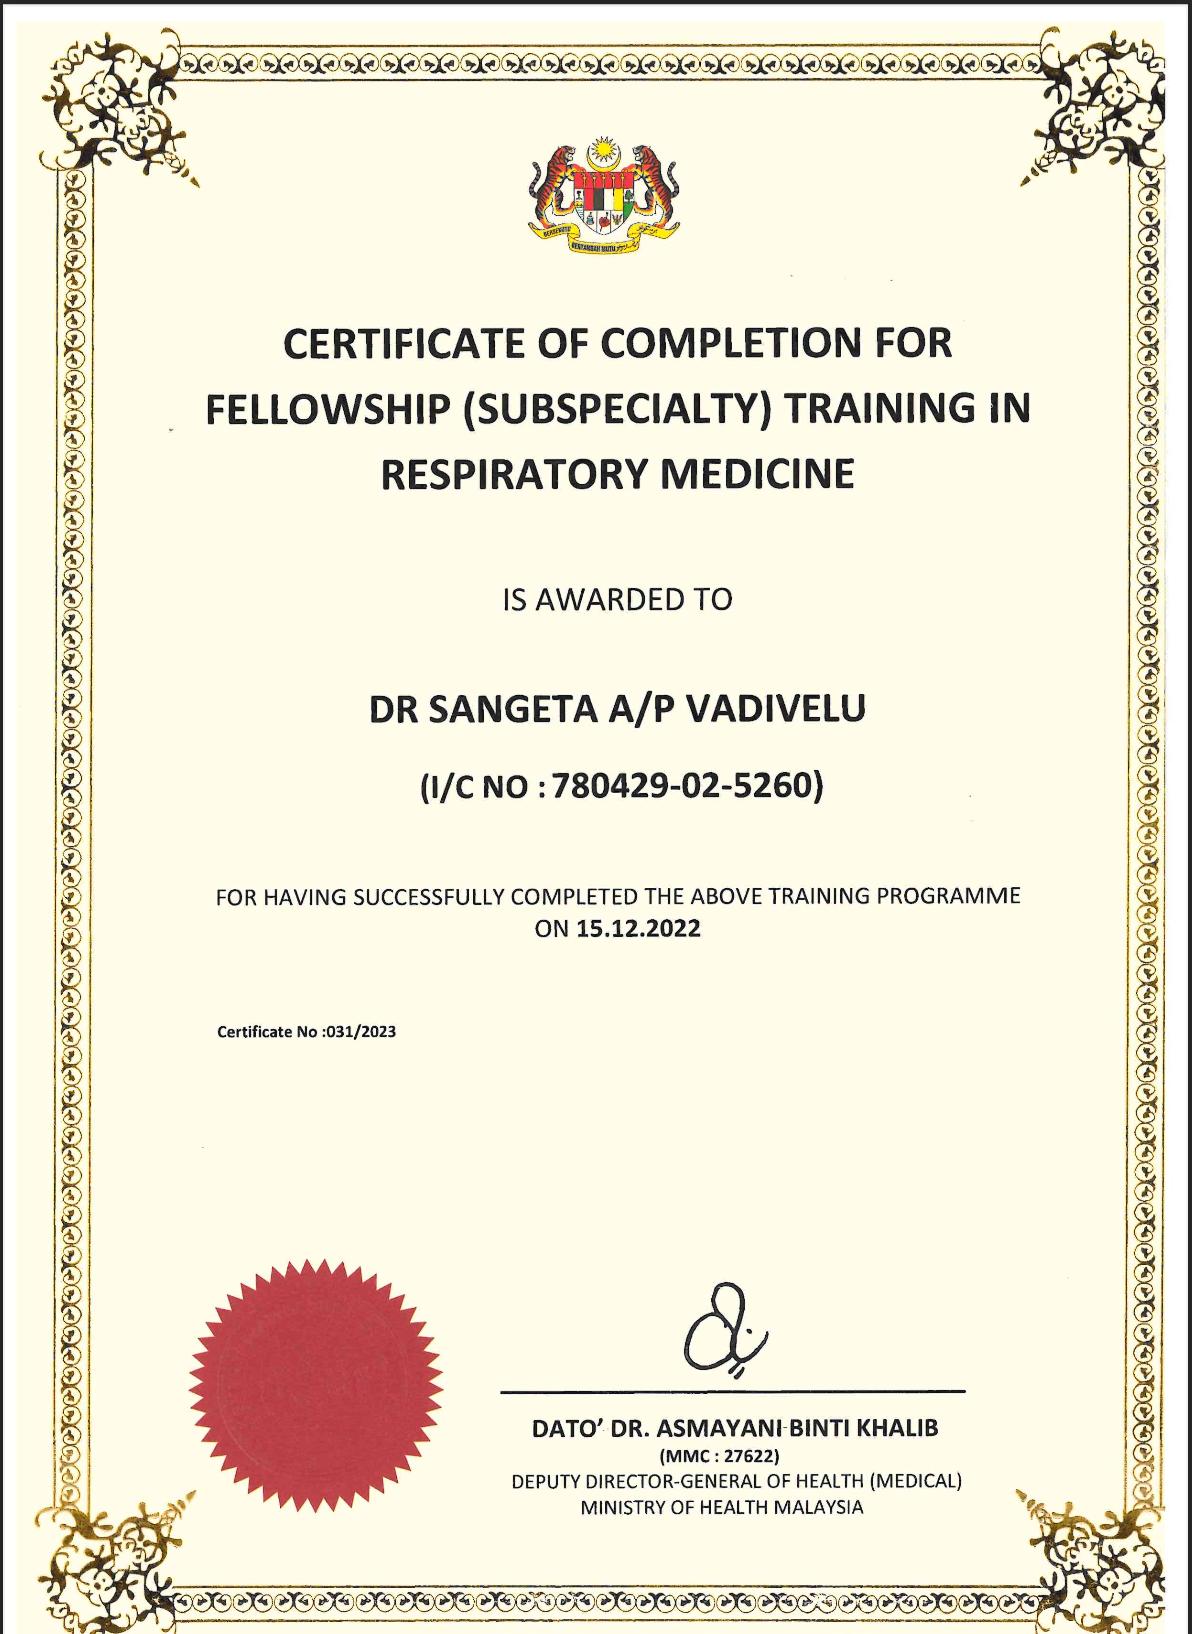 CERTIFICATE OF COMPLETION FOR FELLOWSHIP (SUBSPECIALTY) TRAINING IN RESPIRATORY MEDICINE